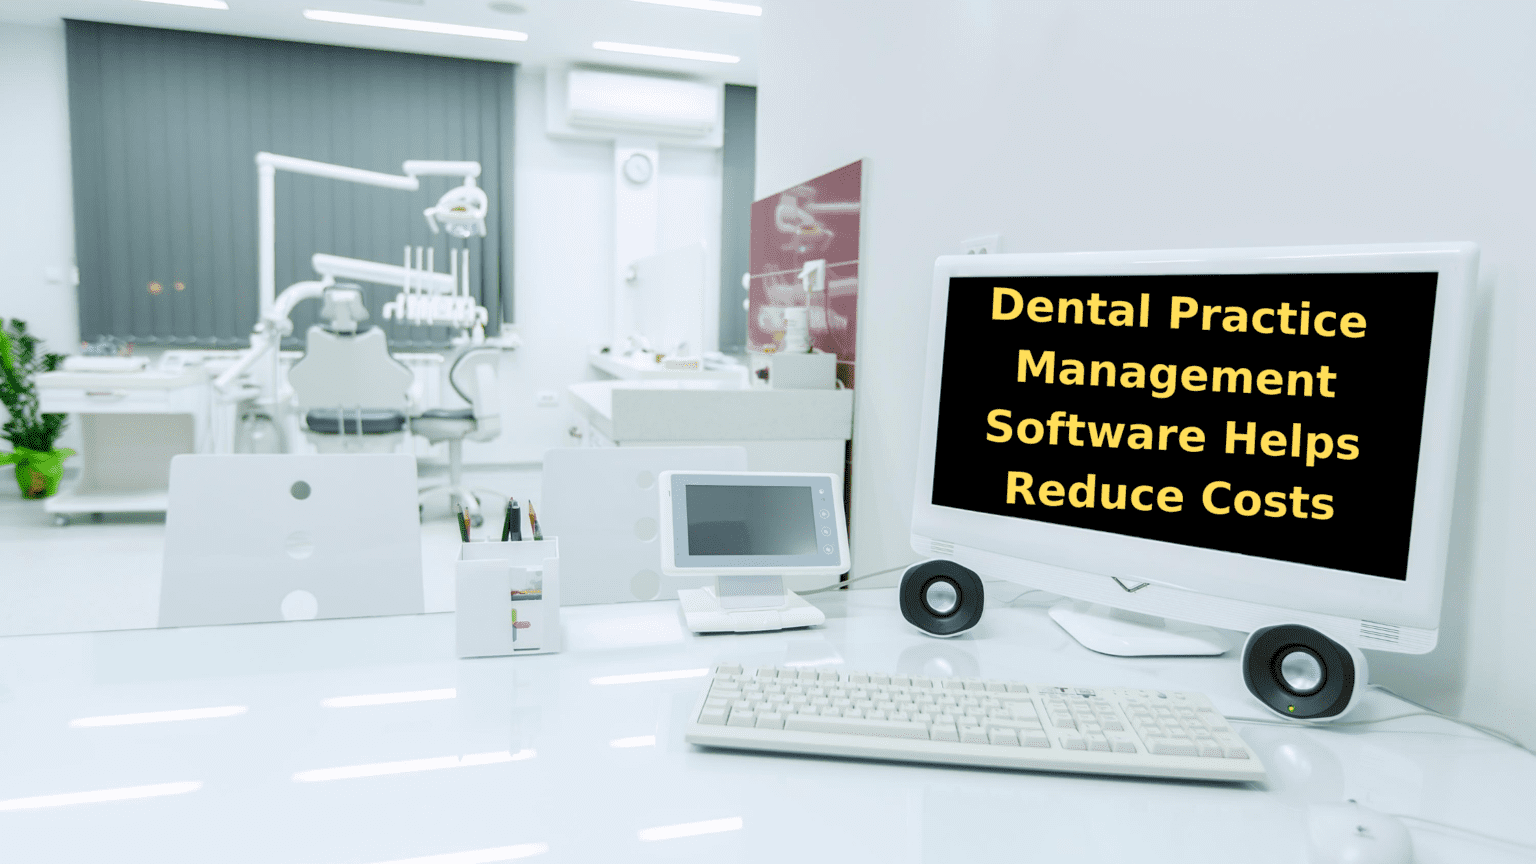 Dental Practice Management Software Helps Reduce Costs